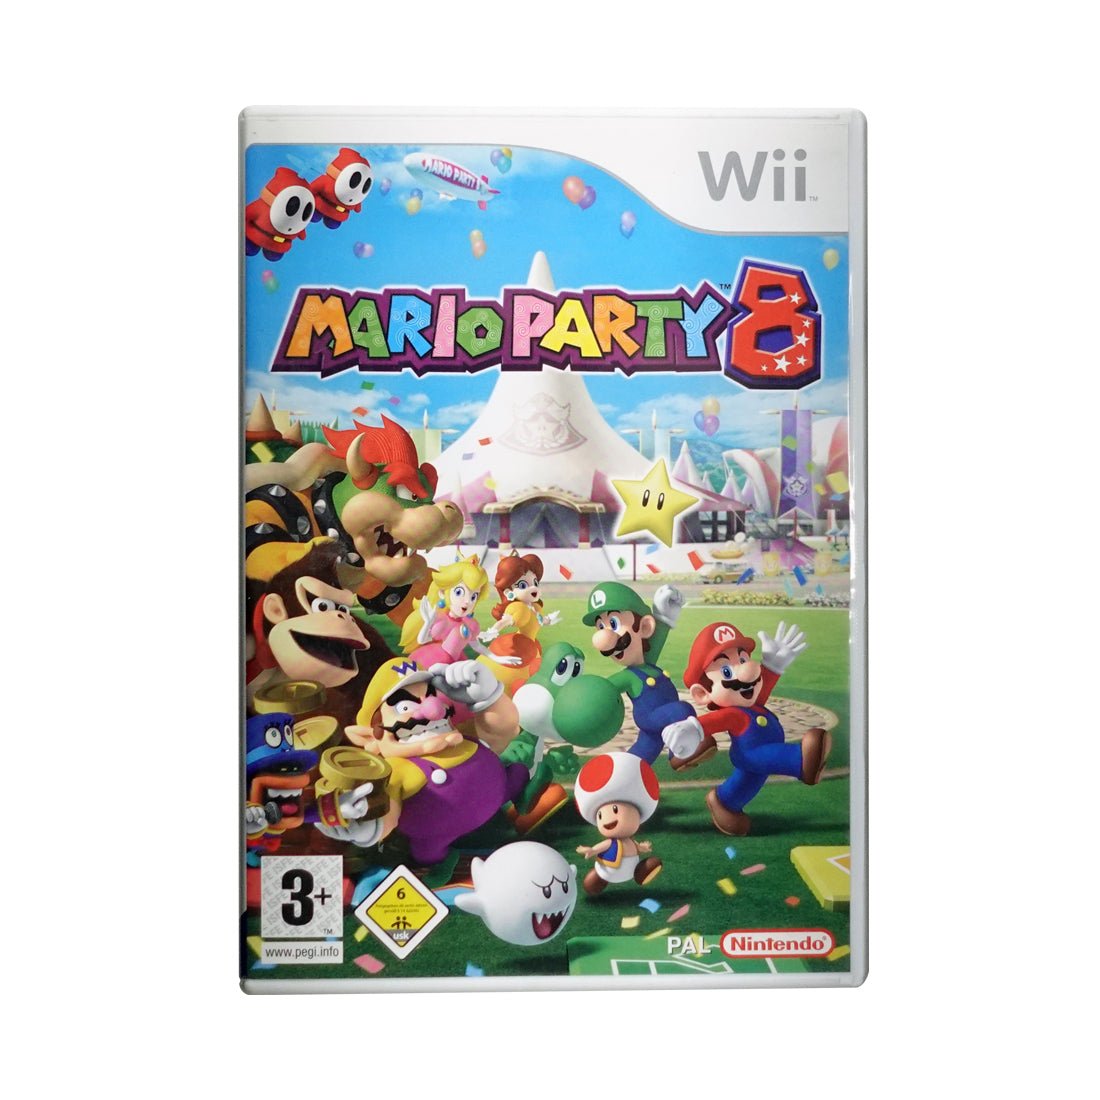 (Pre-Owned) Mario Party 8 - Nintendo WII - Store 974 | ستور ٩٧٤